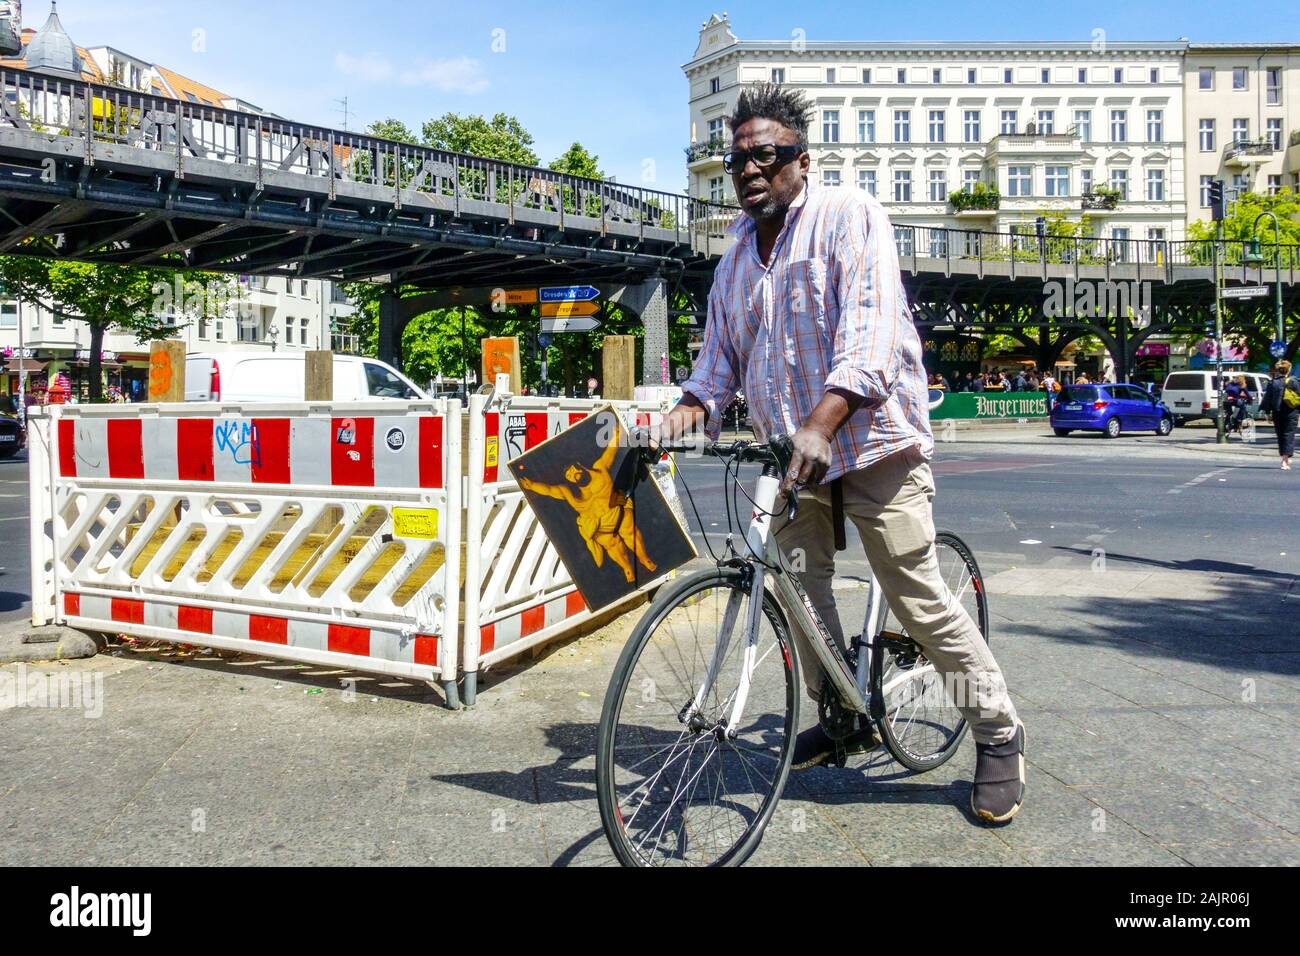 Germany Berlin Kreuzberg Daily Life, Man on a bike with a picture of fat Jesus Schlesisches Tor, Berlin City people Afro American man Berlin bike Stock Photo